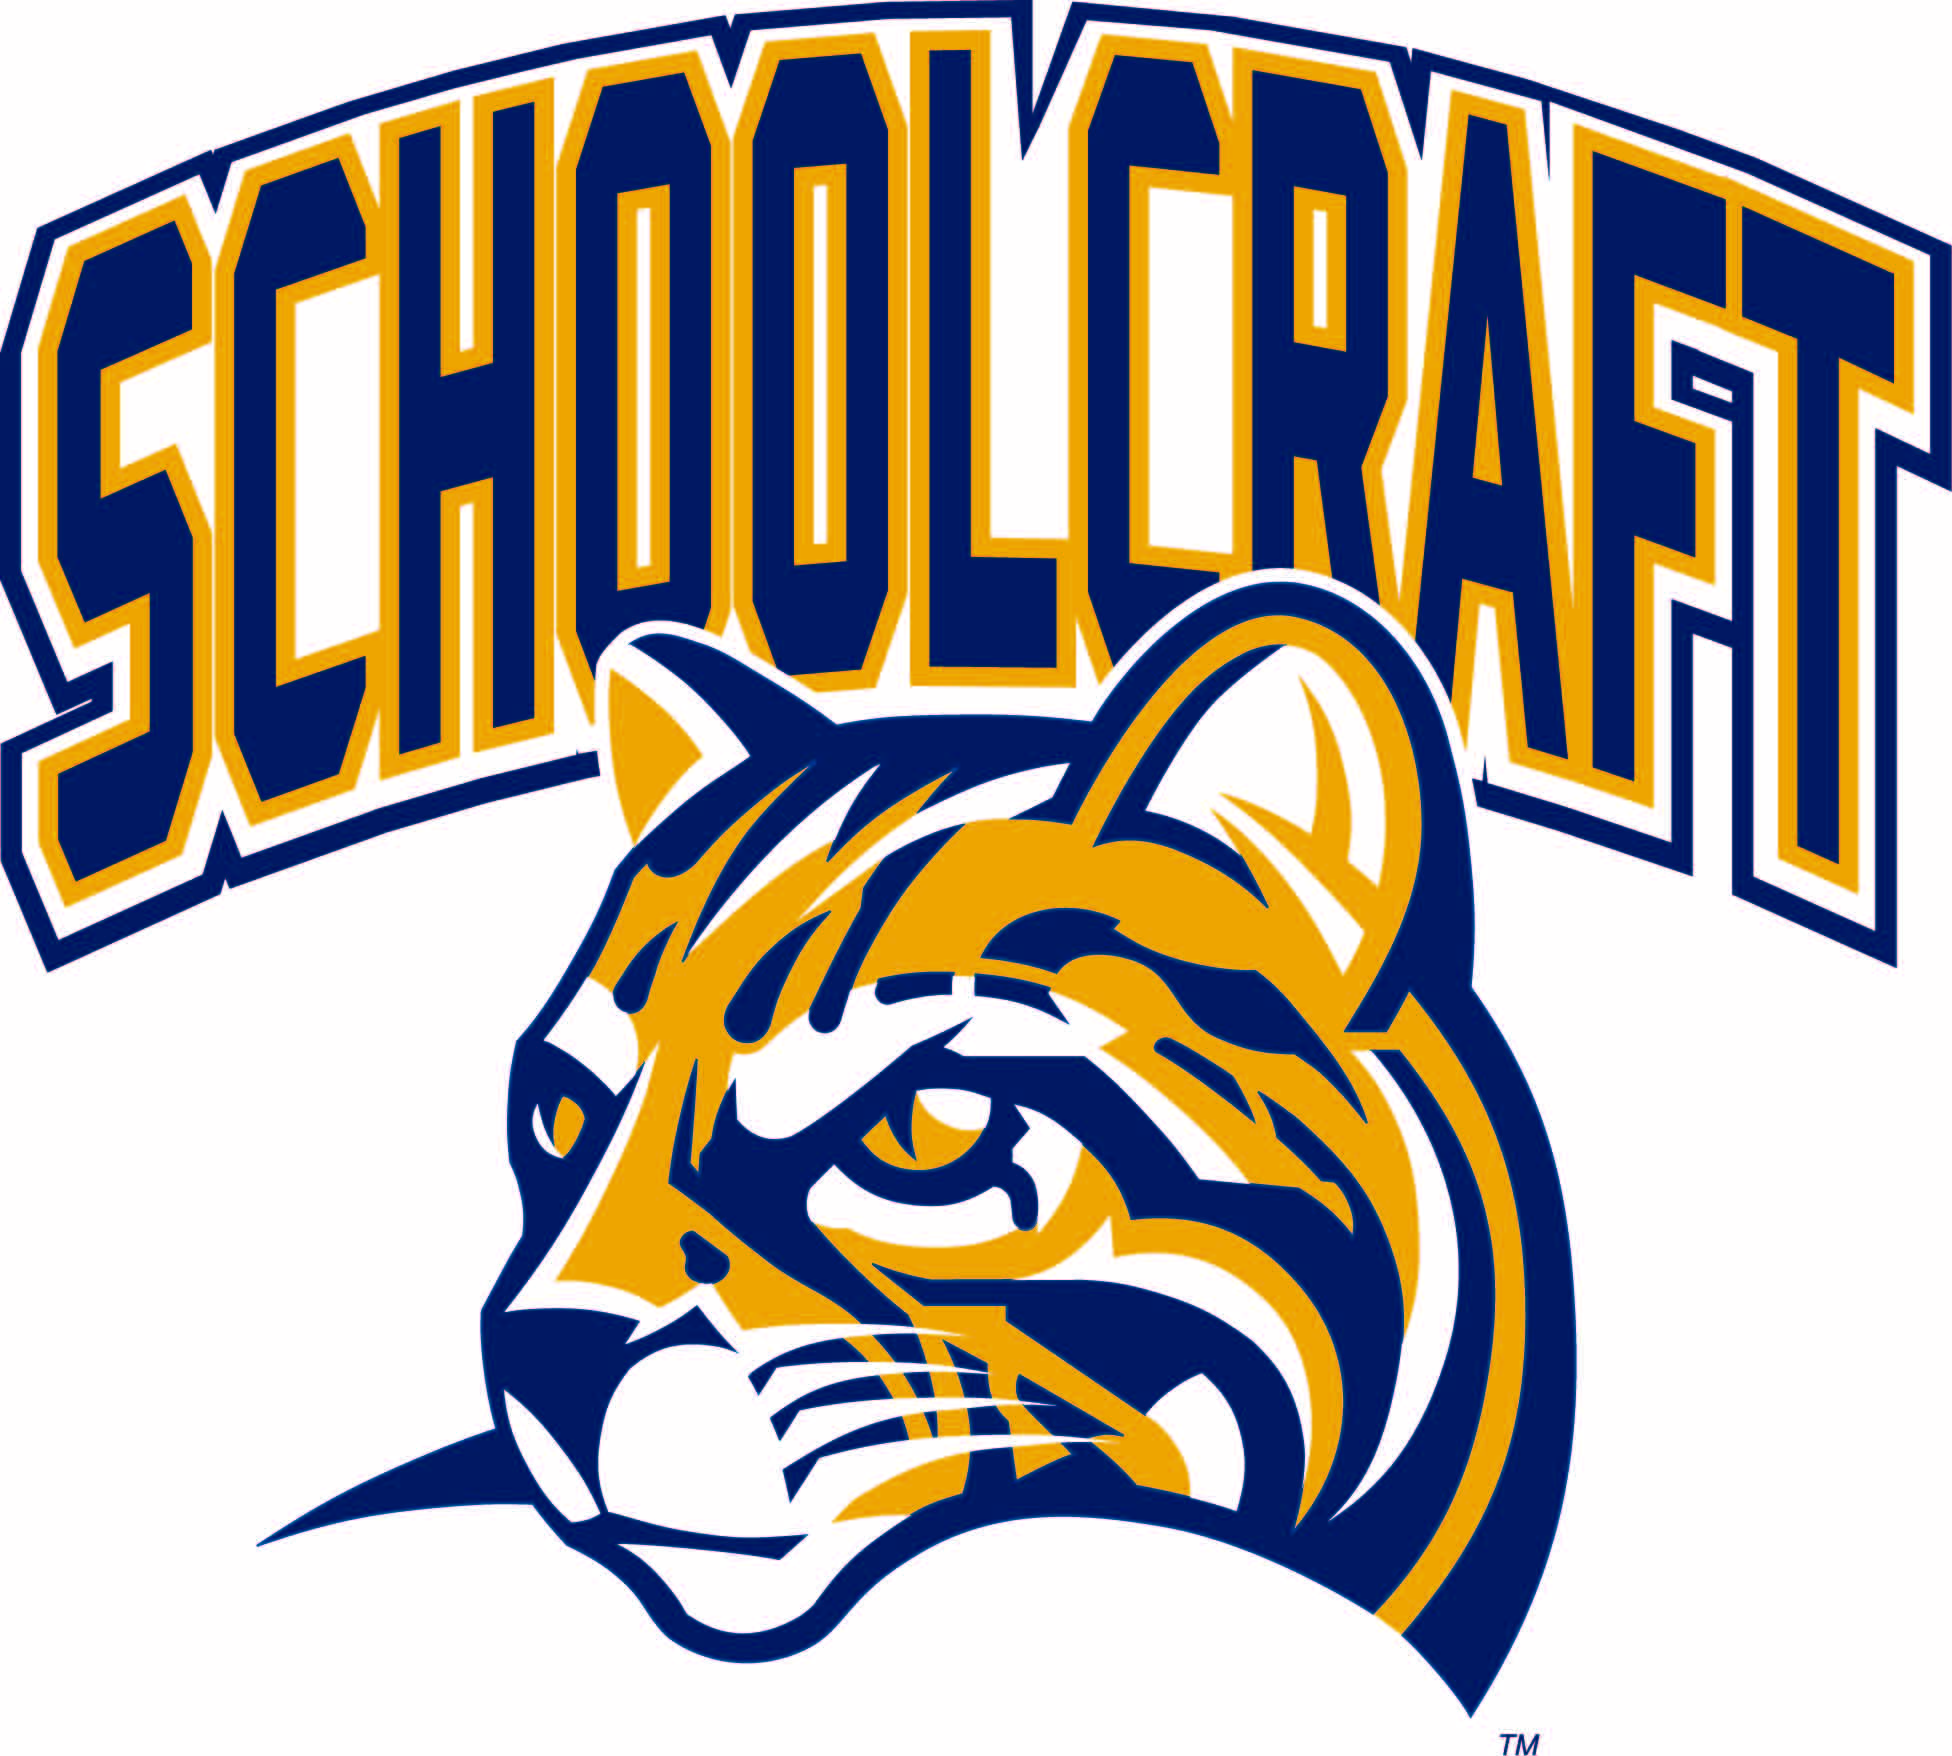 Illustration artwork of an ocelot cat in blue and gold color with block collegiate lettering behind it that reads Schoolcraft